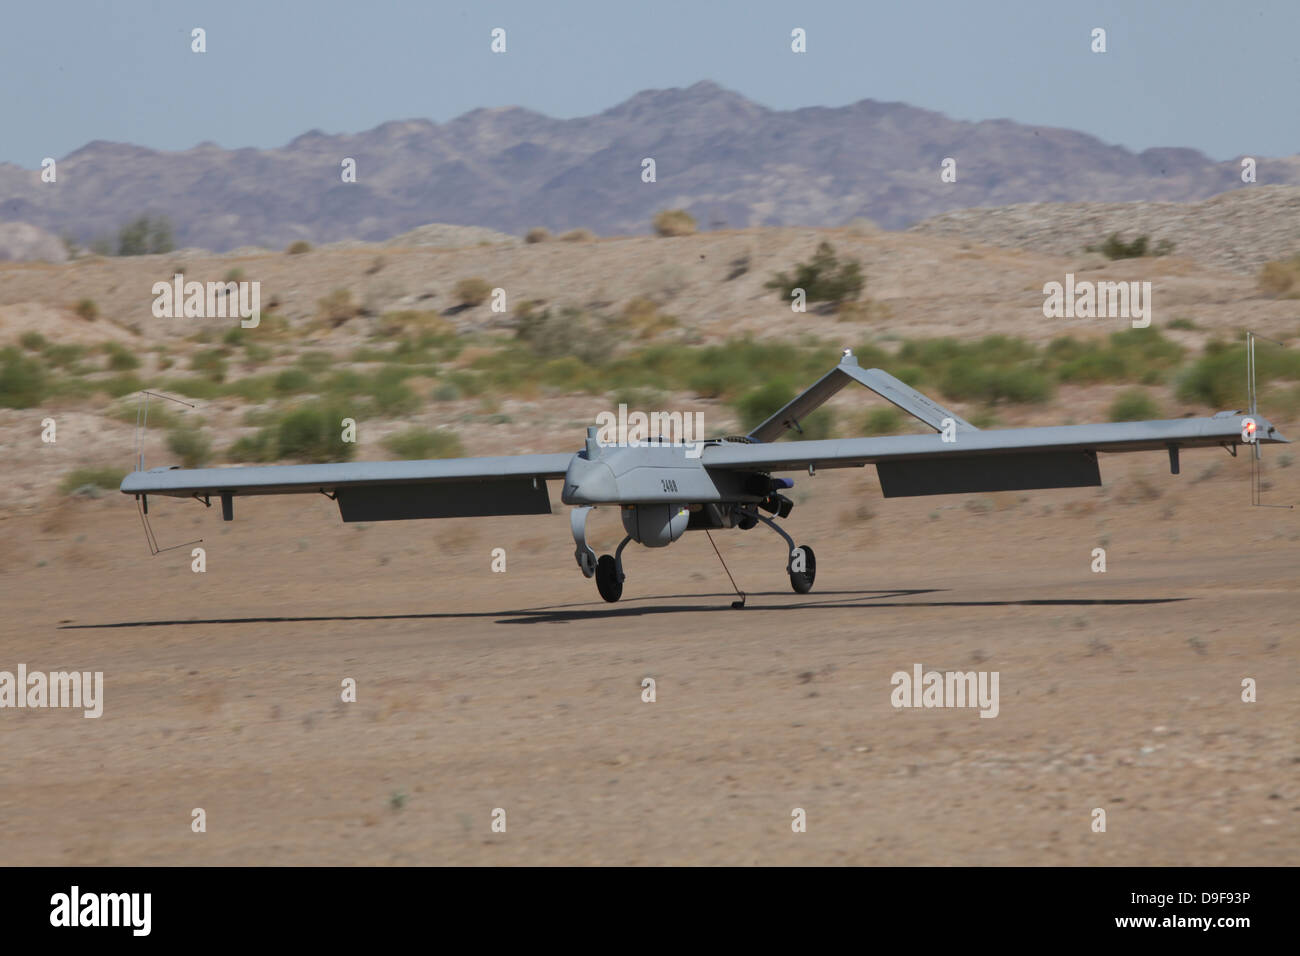 An RQ-7B Shadow unmanned aerial vehicle prepares to land. Stock Photo